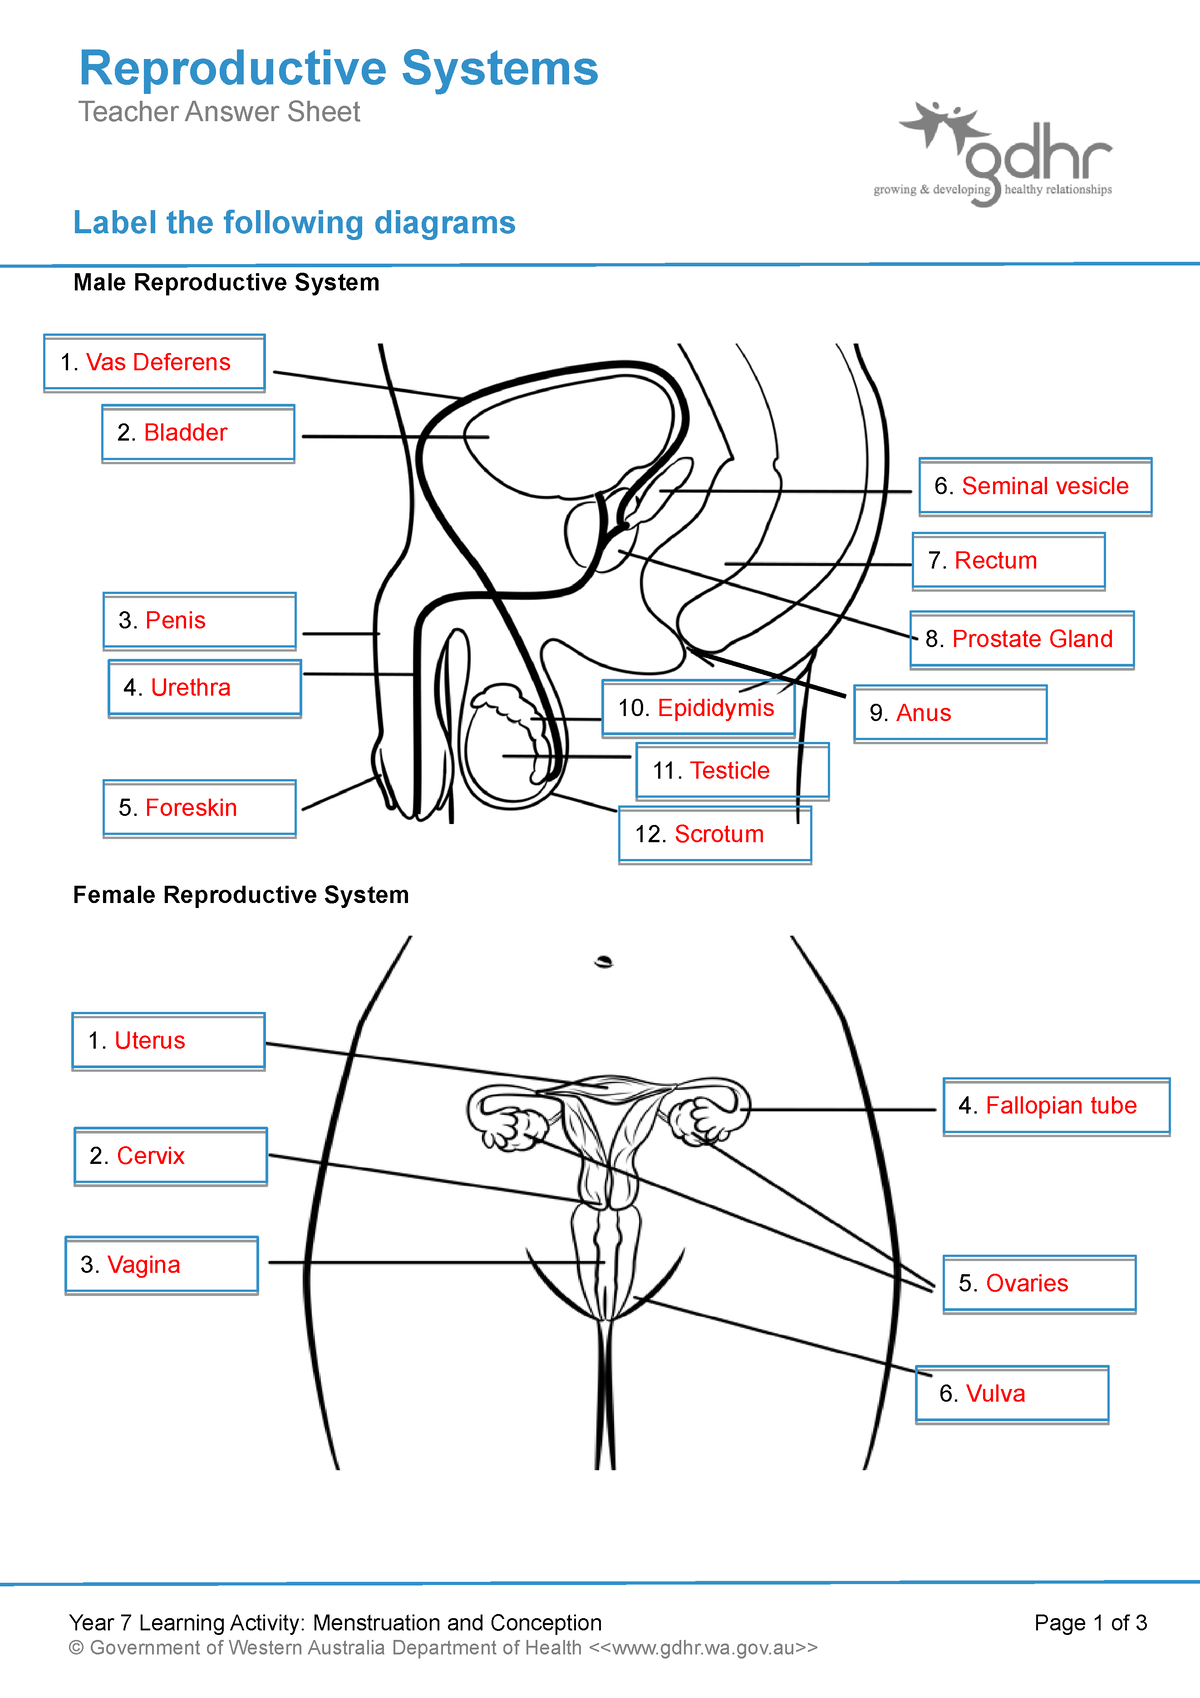 2 1 1 Reproductive Systems Teacher Answer Sheet Label The Following Diagrams Male Reproductive Studocu